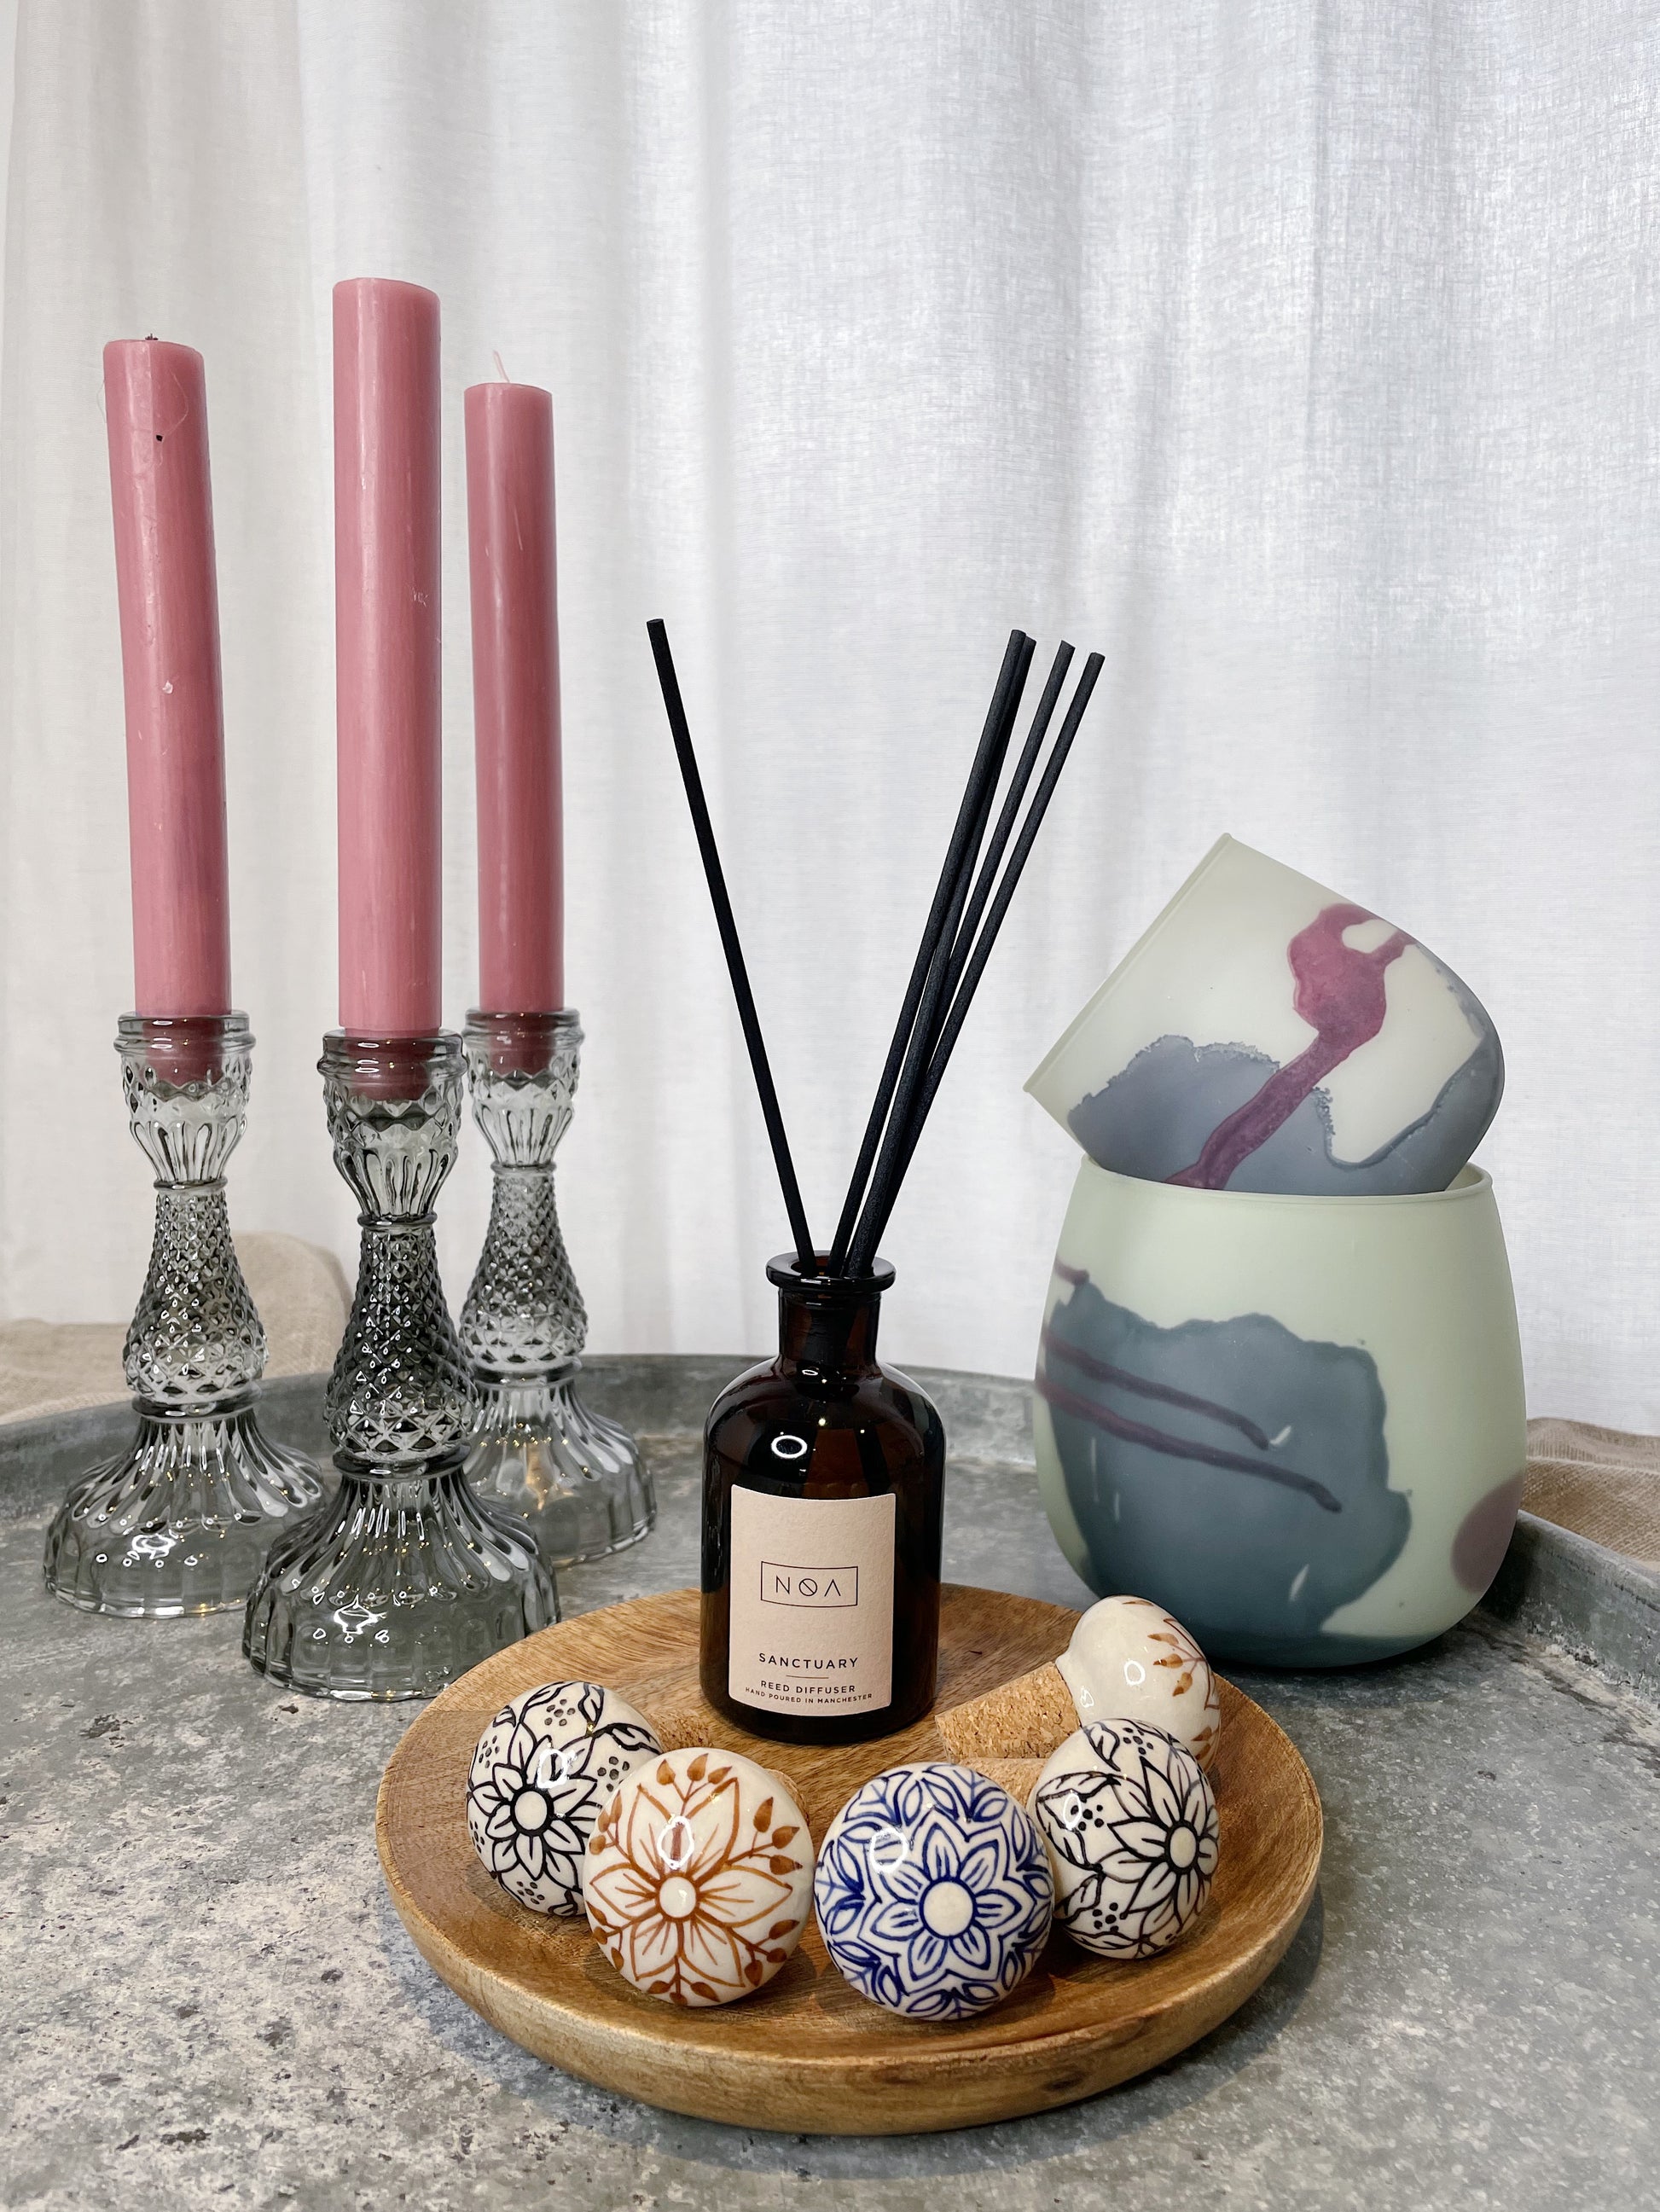 A selection of candlesticks, votives, ceramic bottle stoppers, a diffuser and a wooden plate all on top of a large metal tray